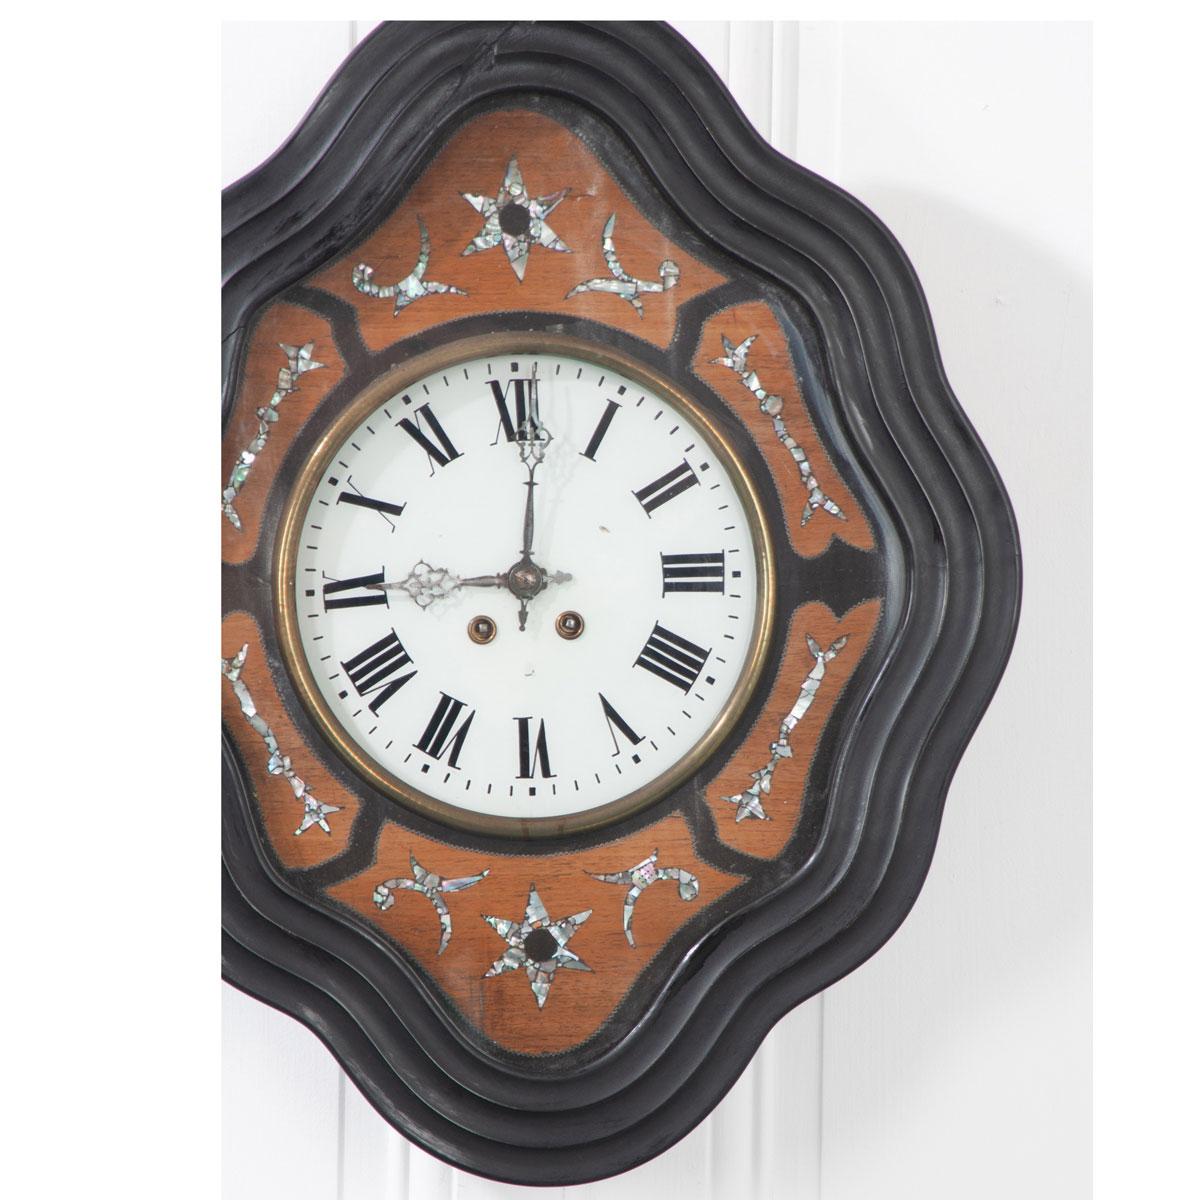 A stunning 19th century wall clock, diamond in shape, with rippling clock frame of ebony-painted wood. mother of pearl astral and filigree designs is inlaid in differently stained mahogany and brilliant mother of pearl, surrounding the porcelain